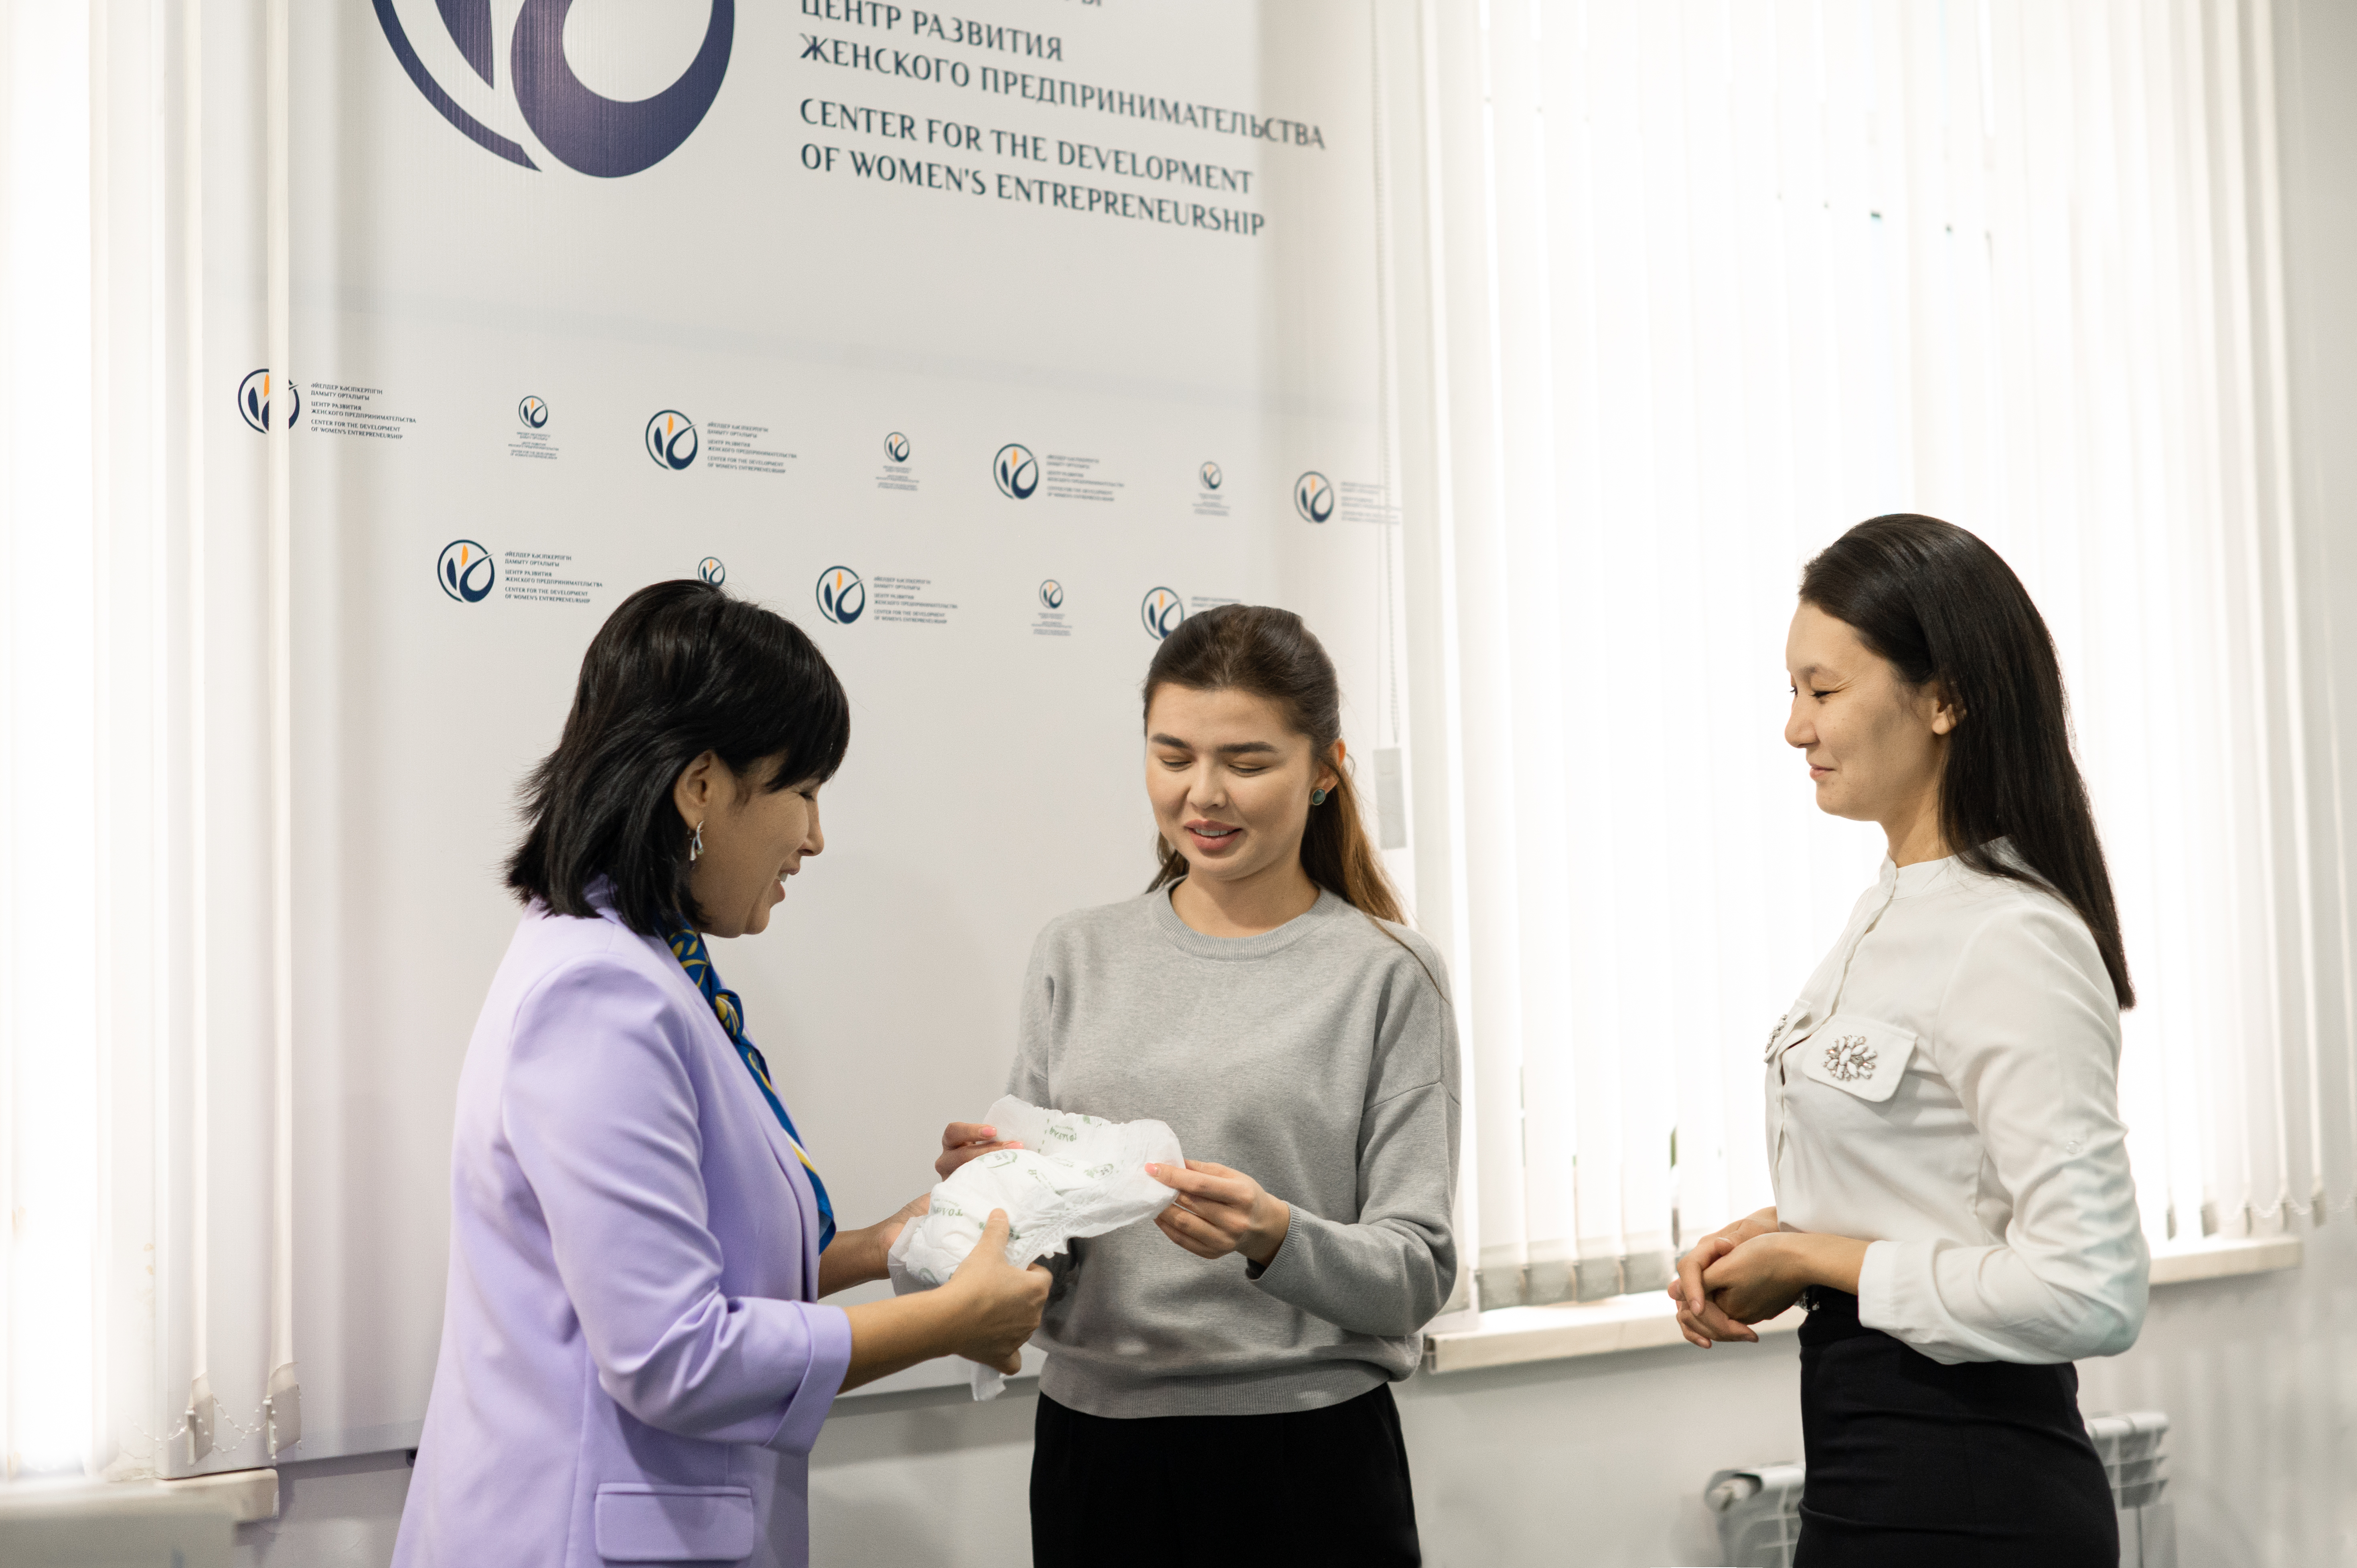 The Government of the Republic of Kazakhstan opened 17 Women’s Entrepreneurship Development Centers (WEDCs) as part of its Generation Equality commitments to the Action Coalition on Economic Justice and Rights. Photo: UN Women Kazakhstan.